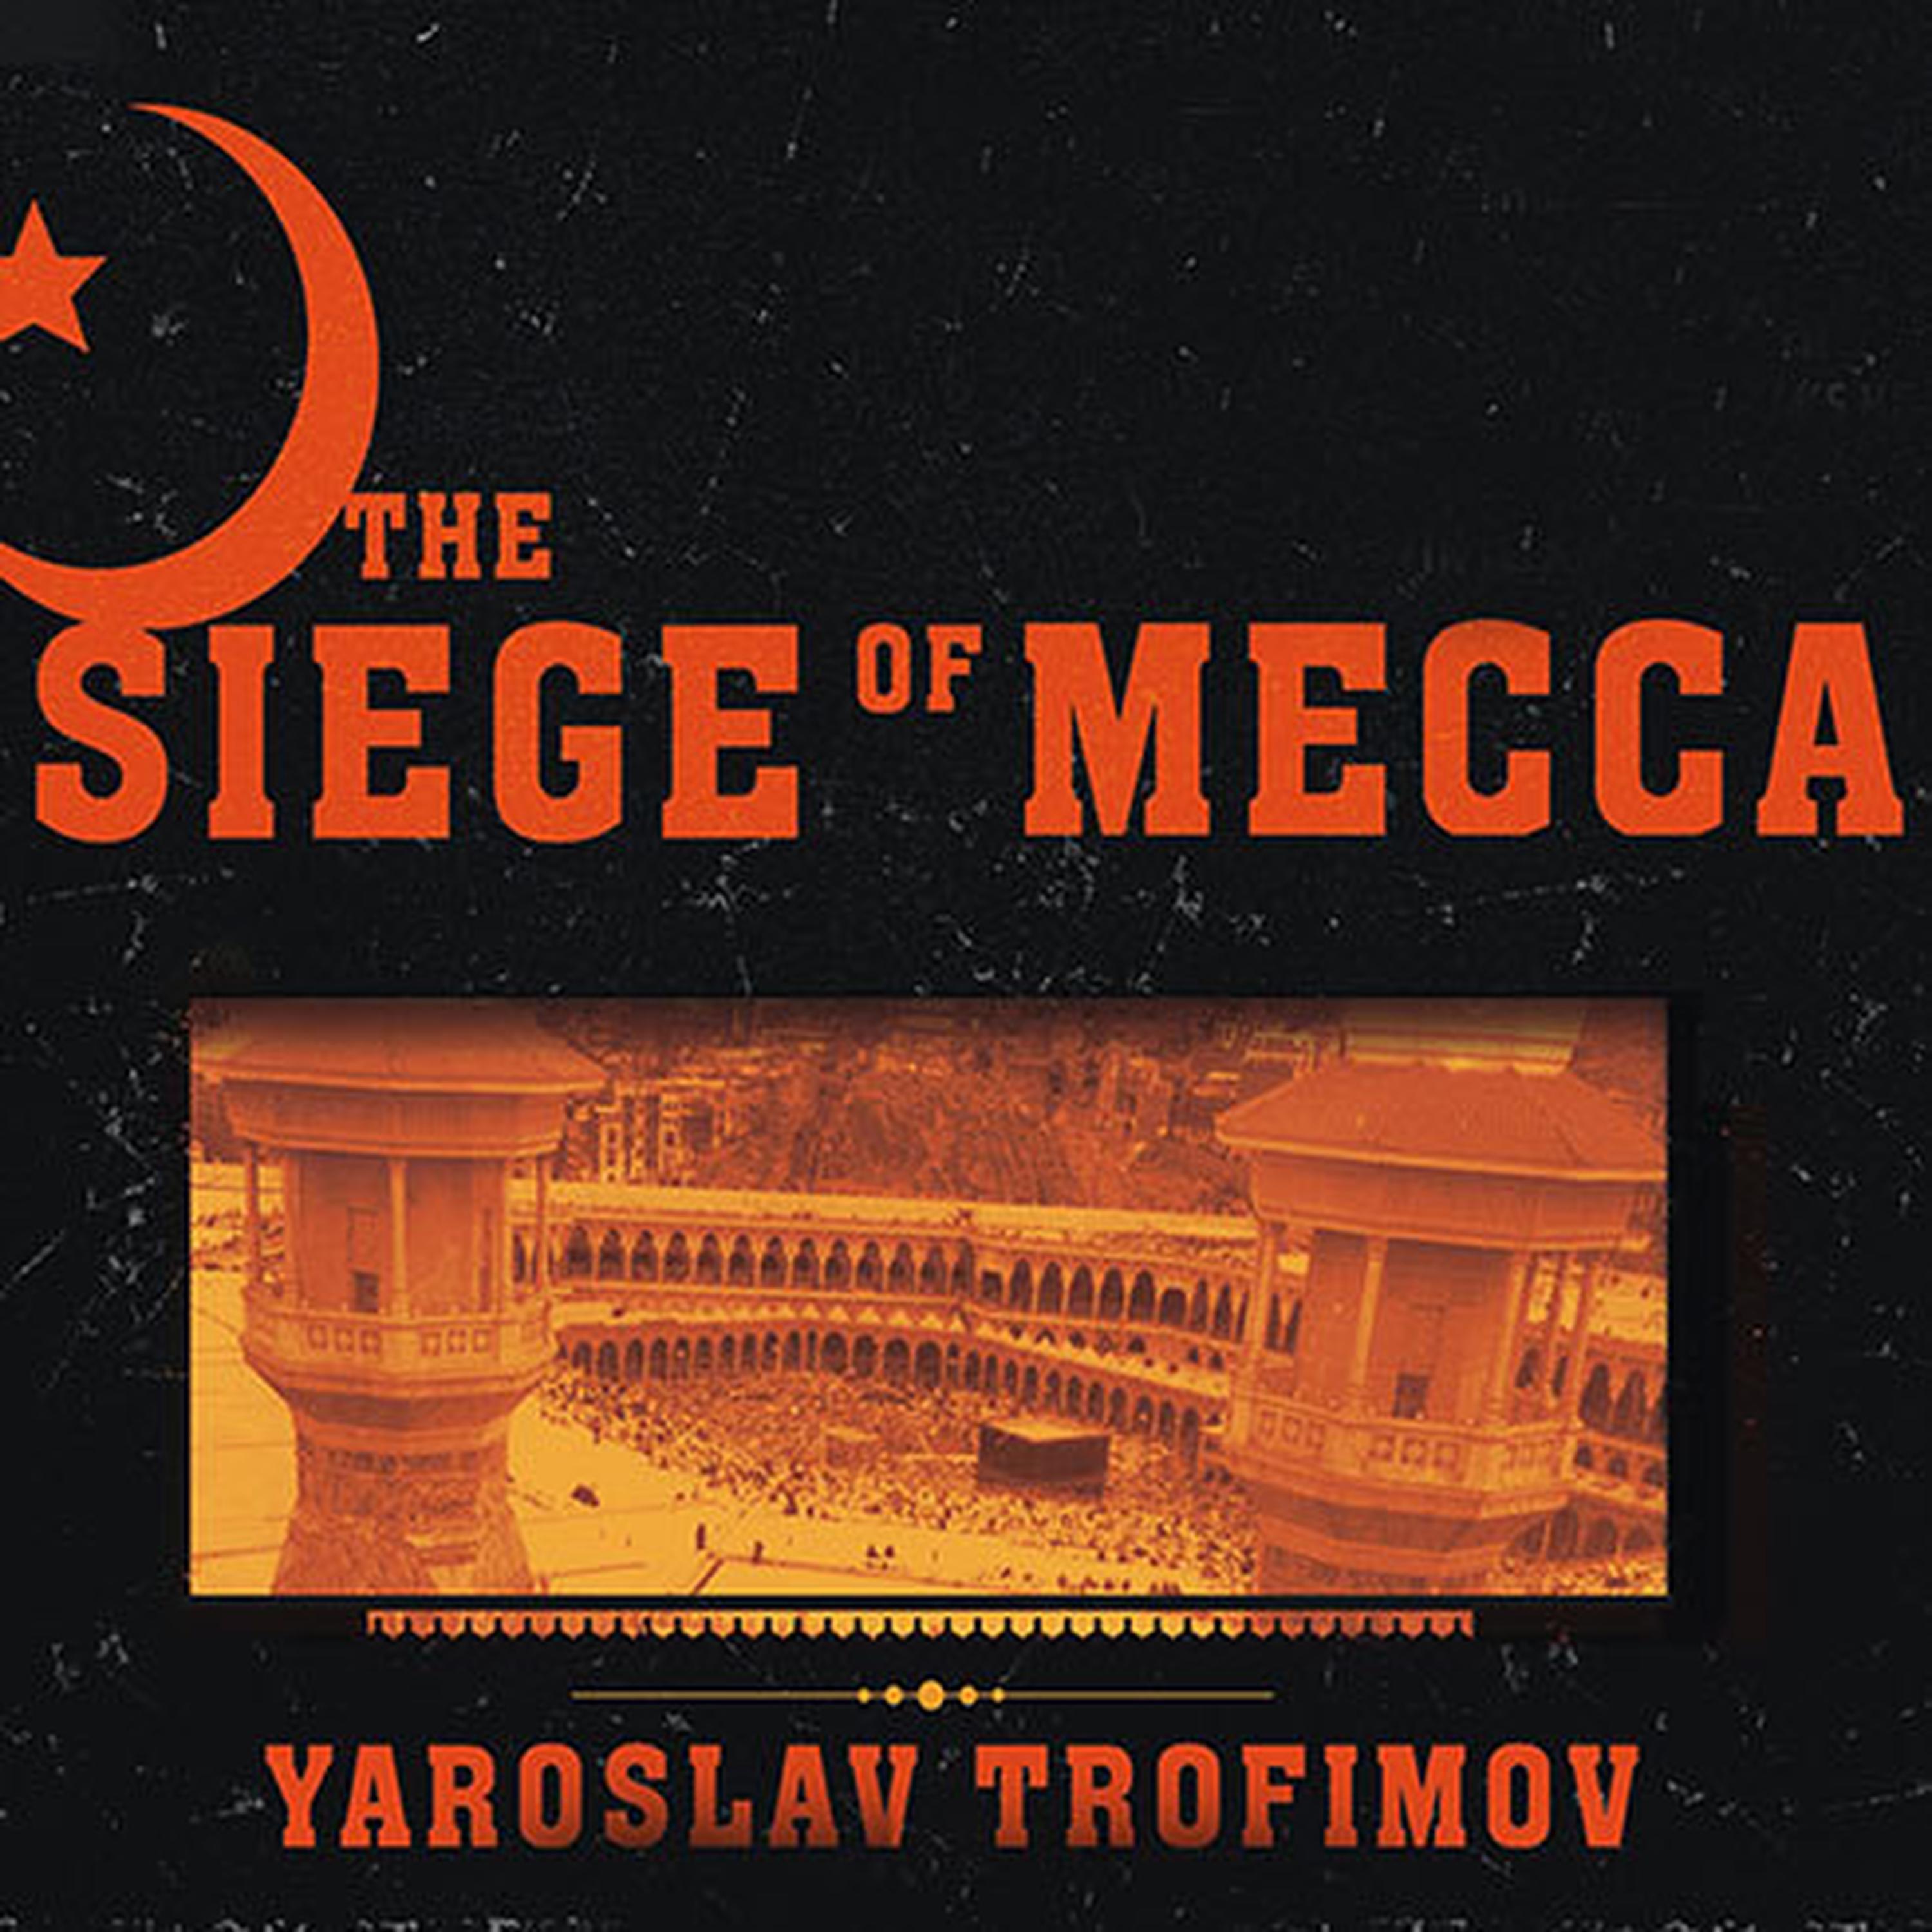 The Siege of Mecca Audiobook Listen Instantly!